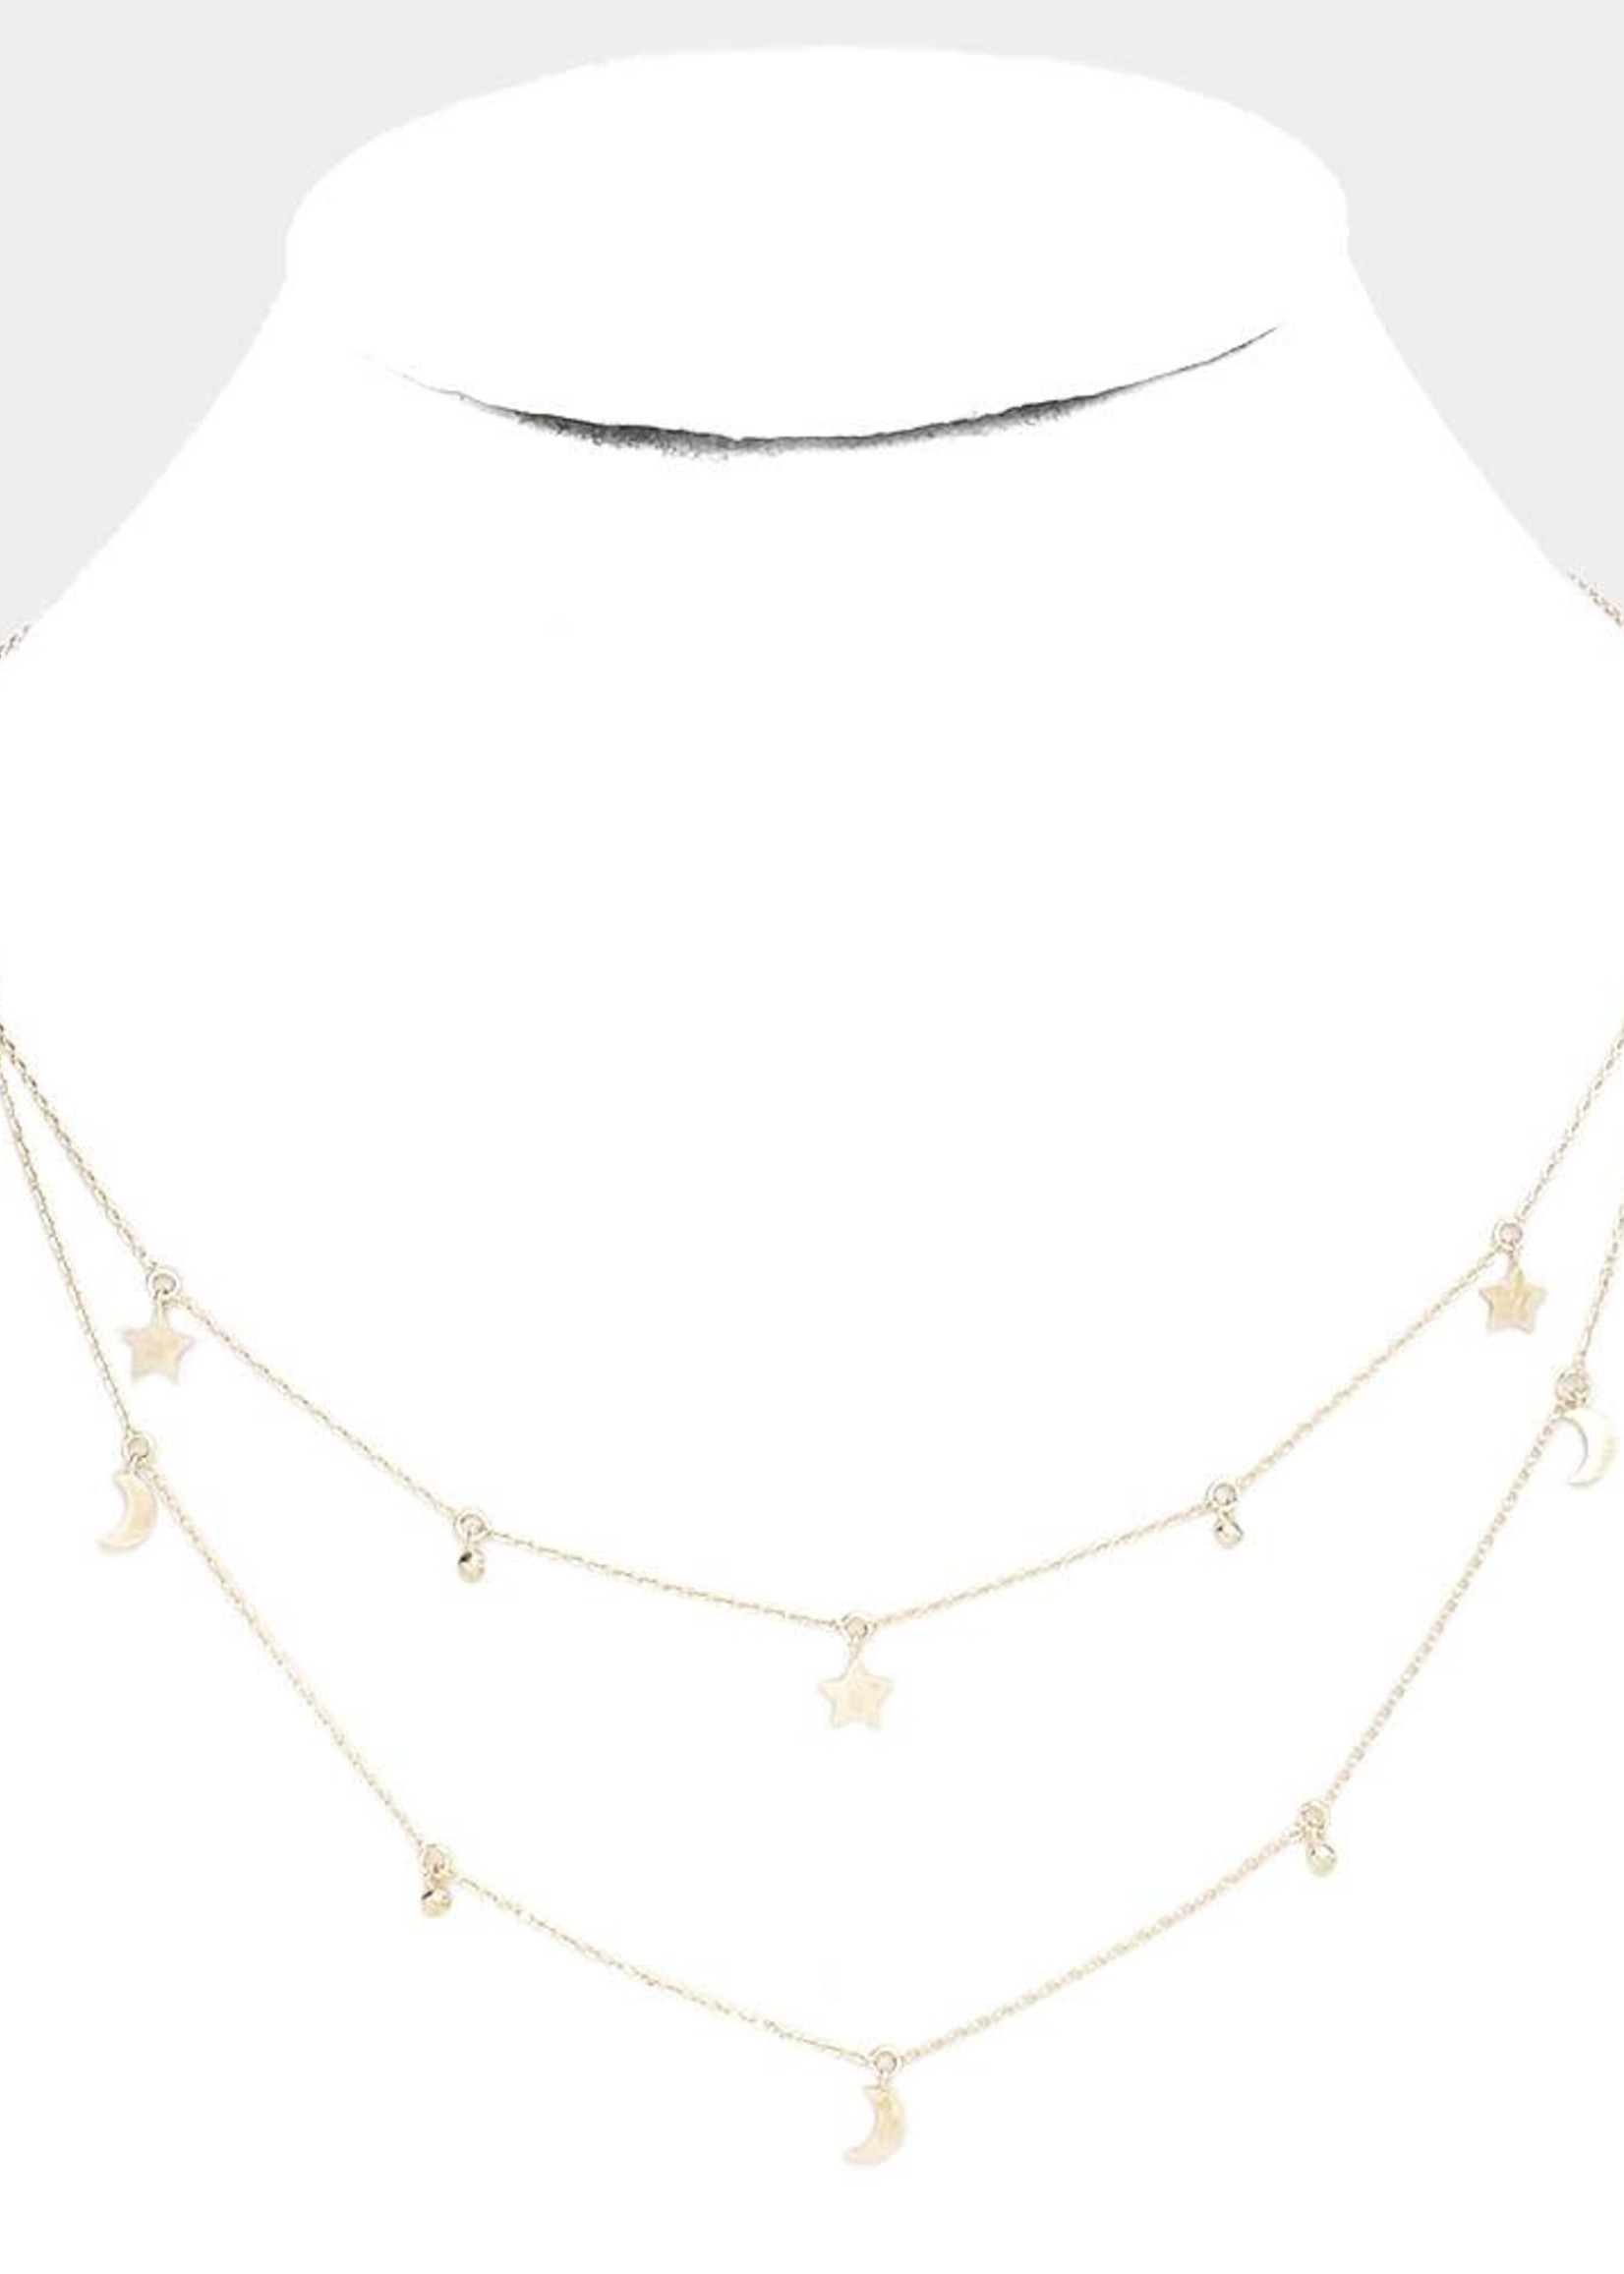 Double Layered Star & Moon Necklace